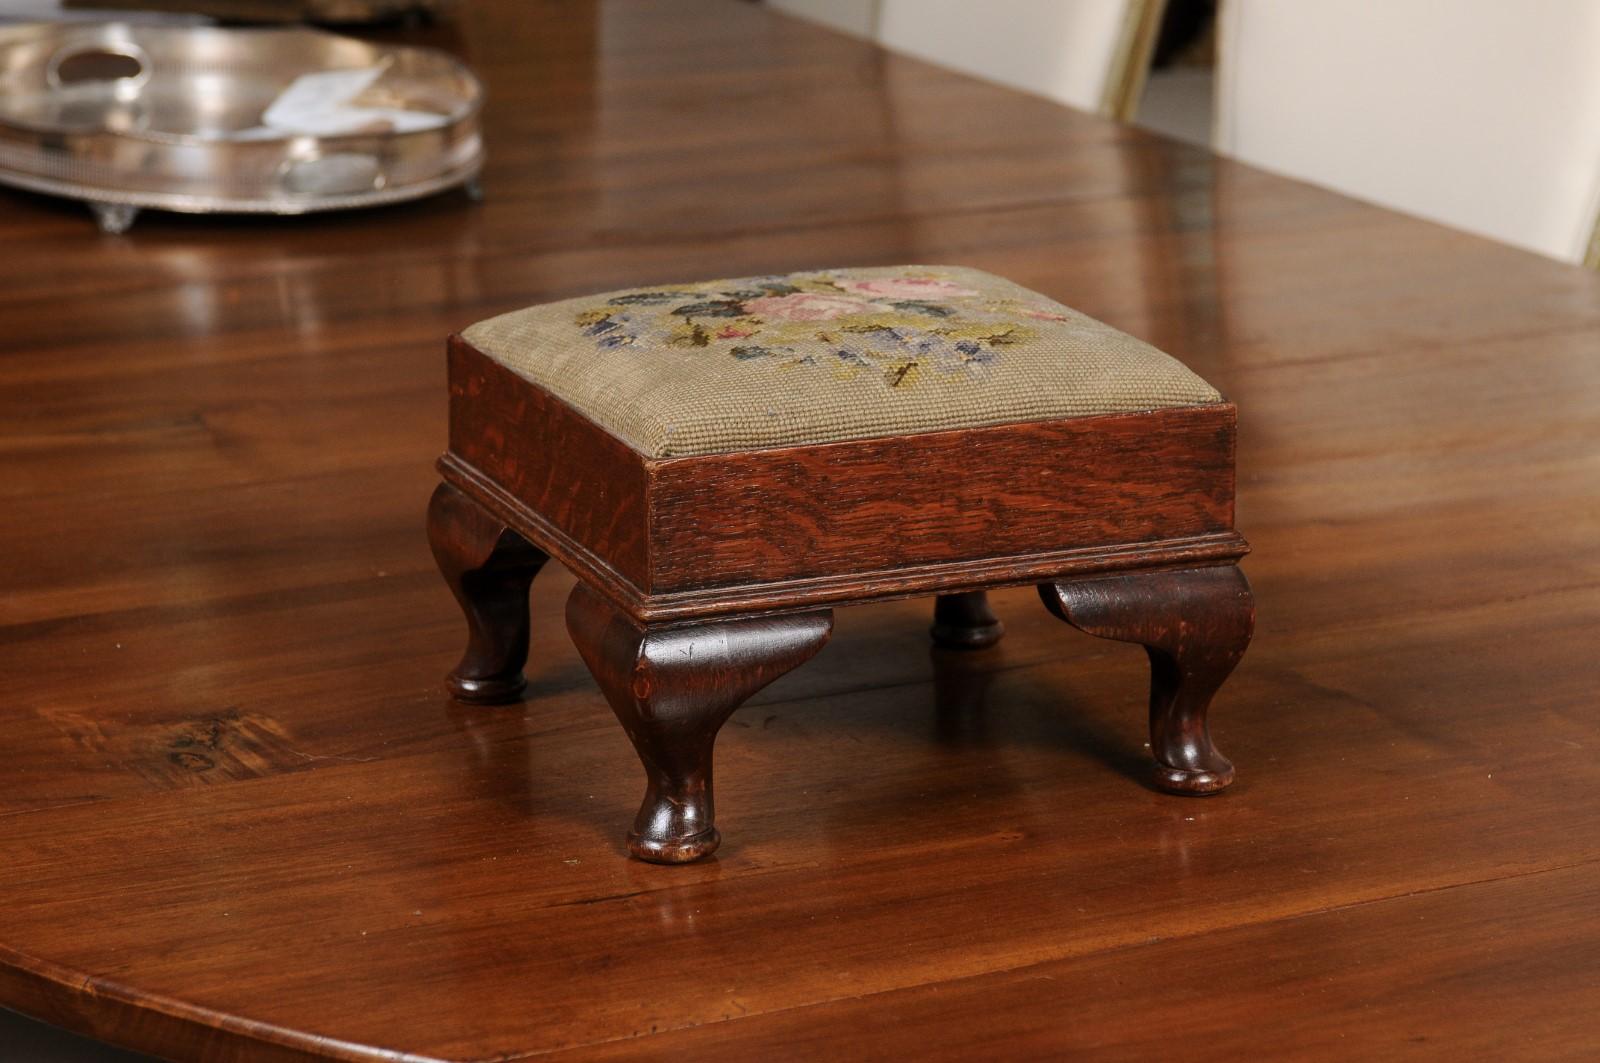 A French Napoléon III period petite footstool from the late 19th century, with floral needlepoint upholstery. Created in France during the third quarter of the 19th century, this petite footstool features a square top covered with a needlepoint